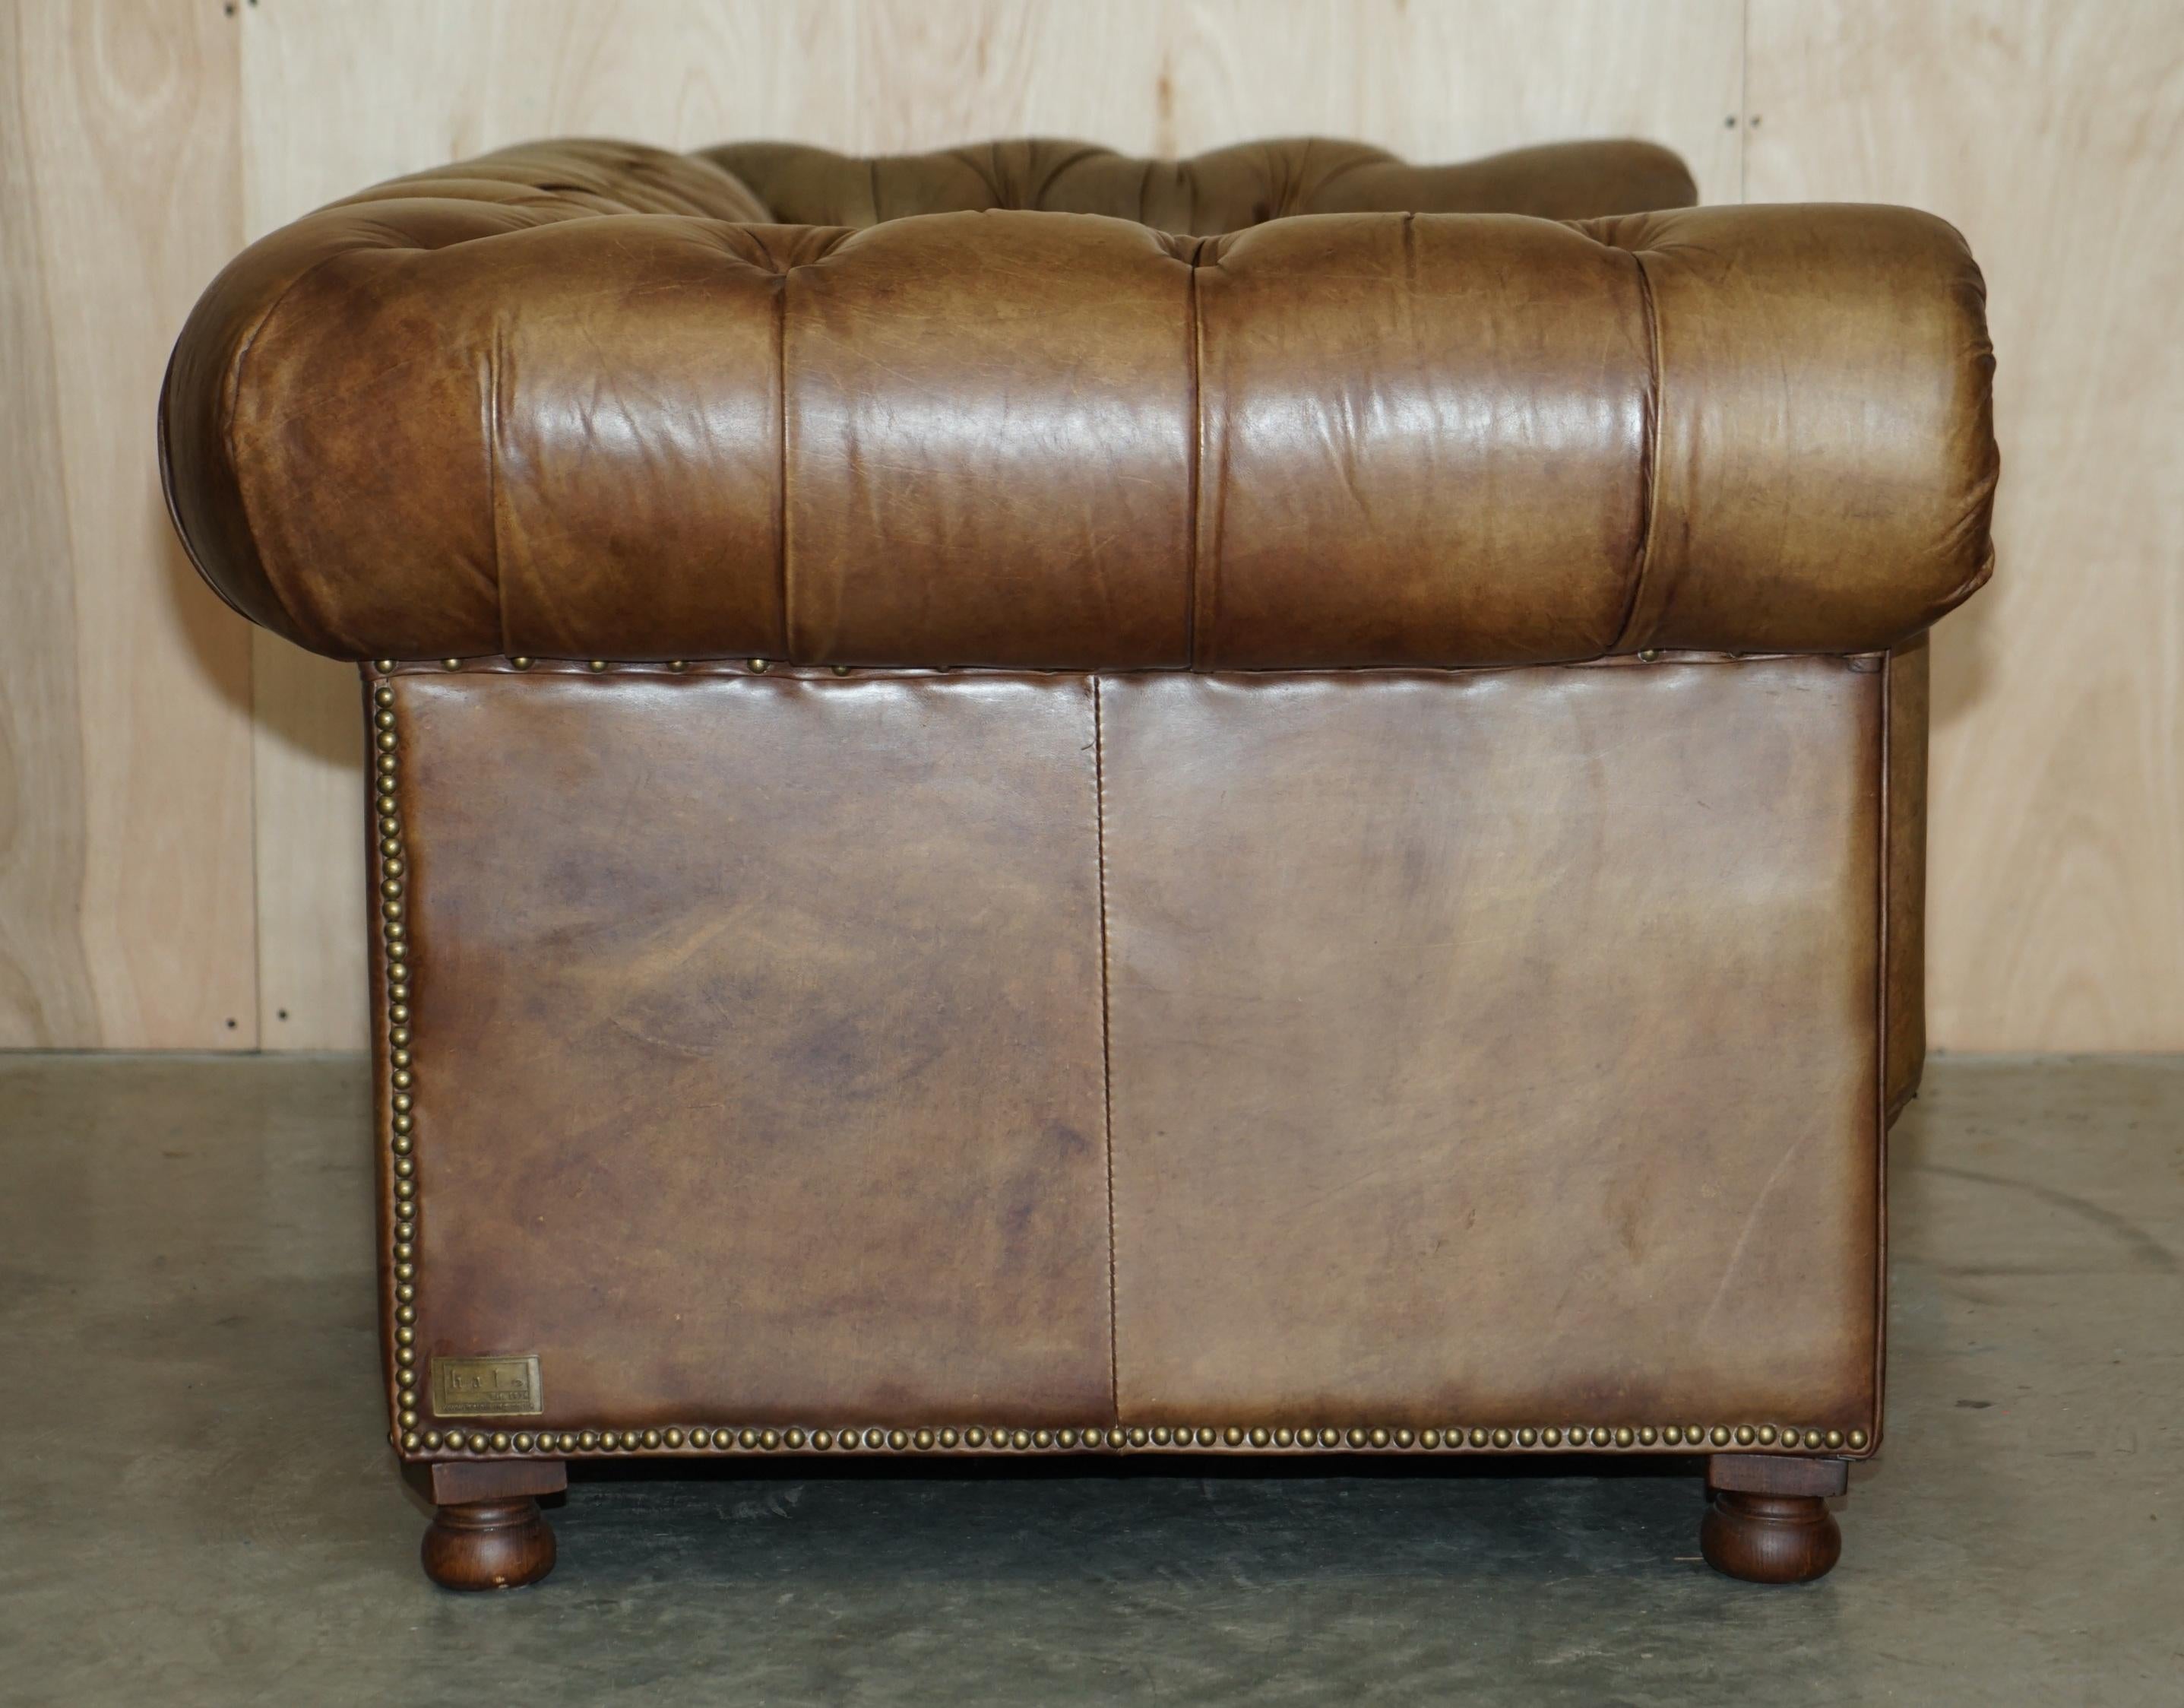 Leather STUNNING TIMOTHY OULTON HALO WESTMiNSTER BROWN LEATHER CHESTERFIELD TUFTED SOFA